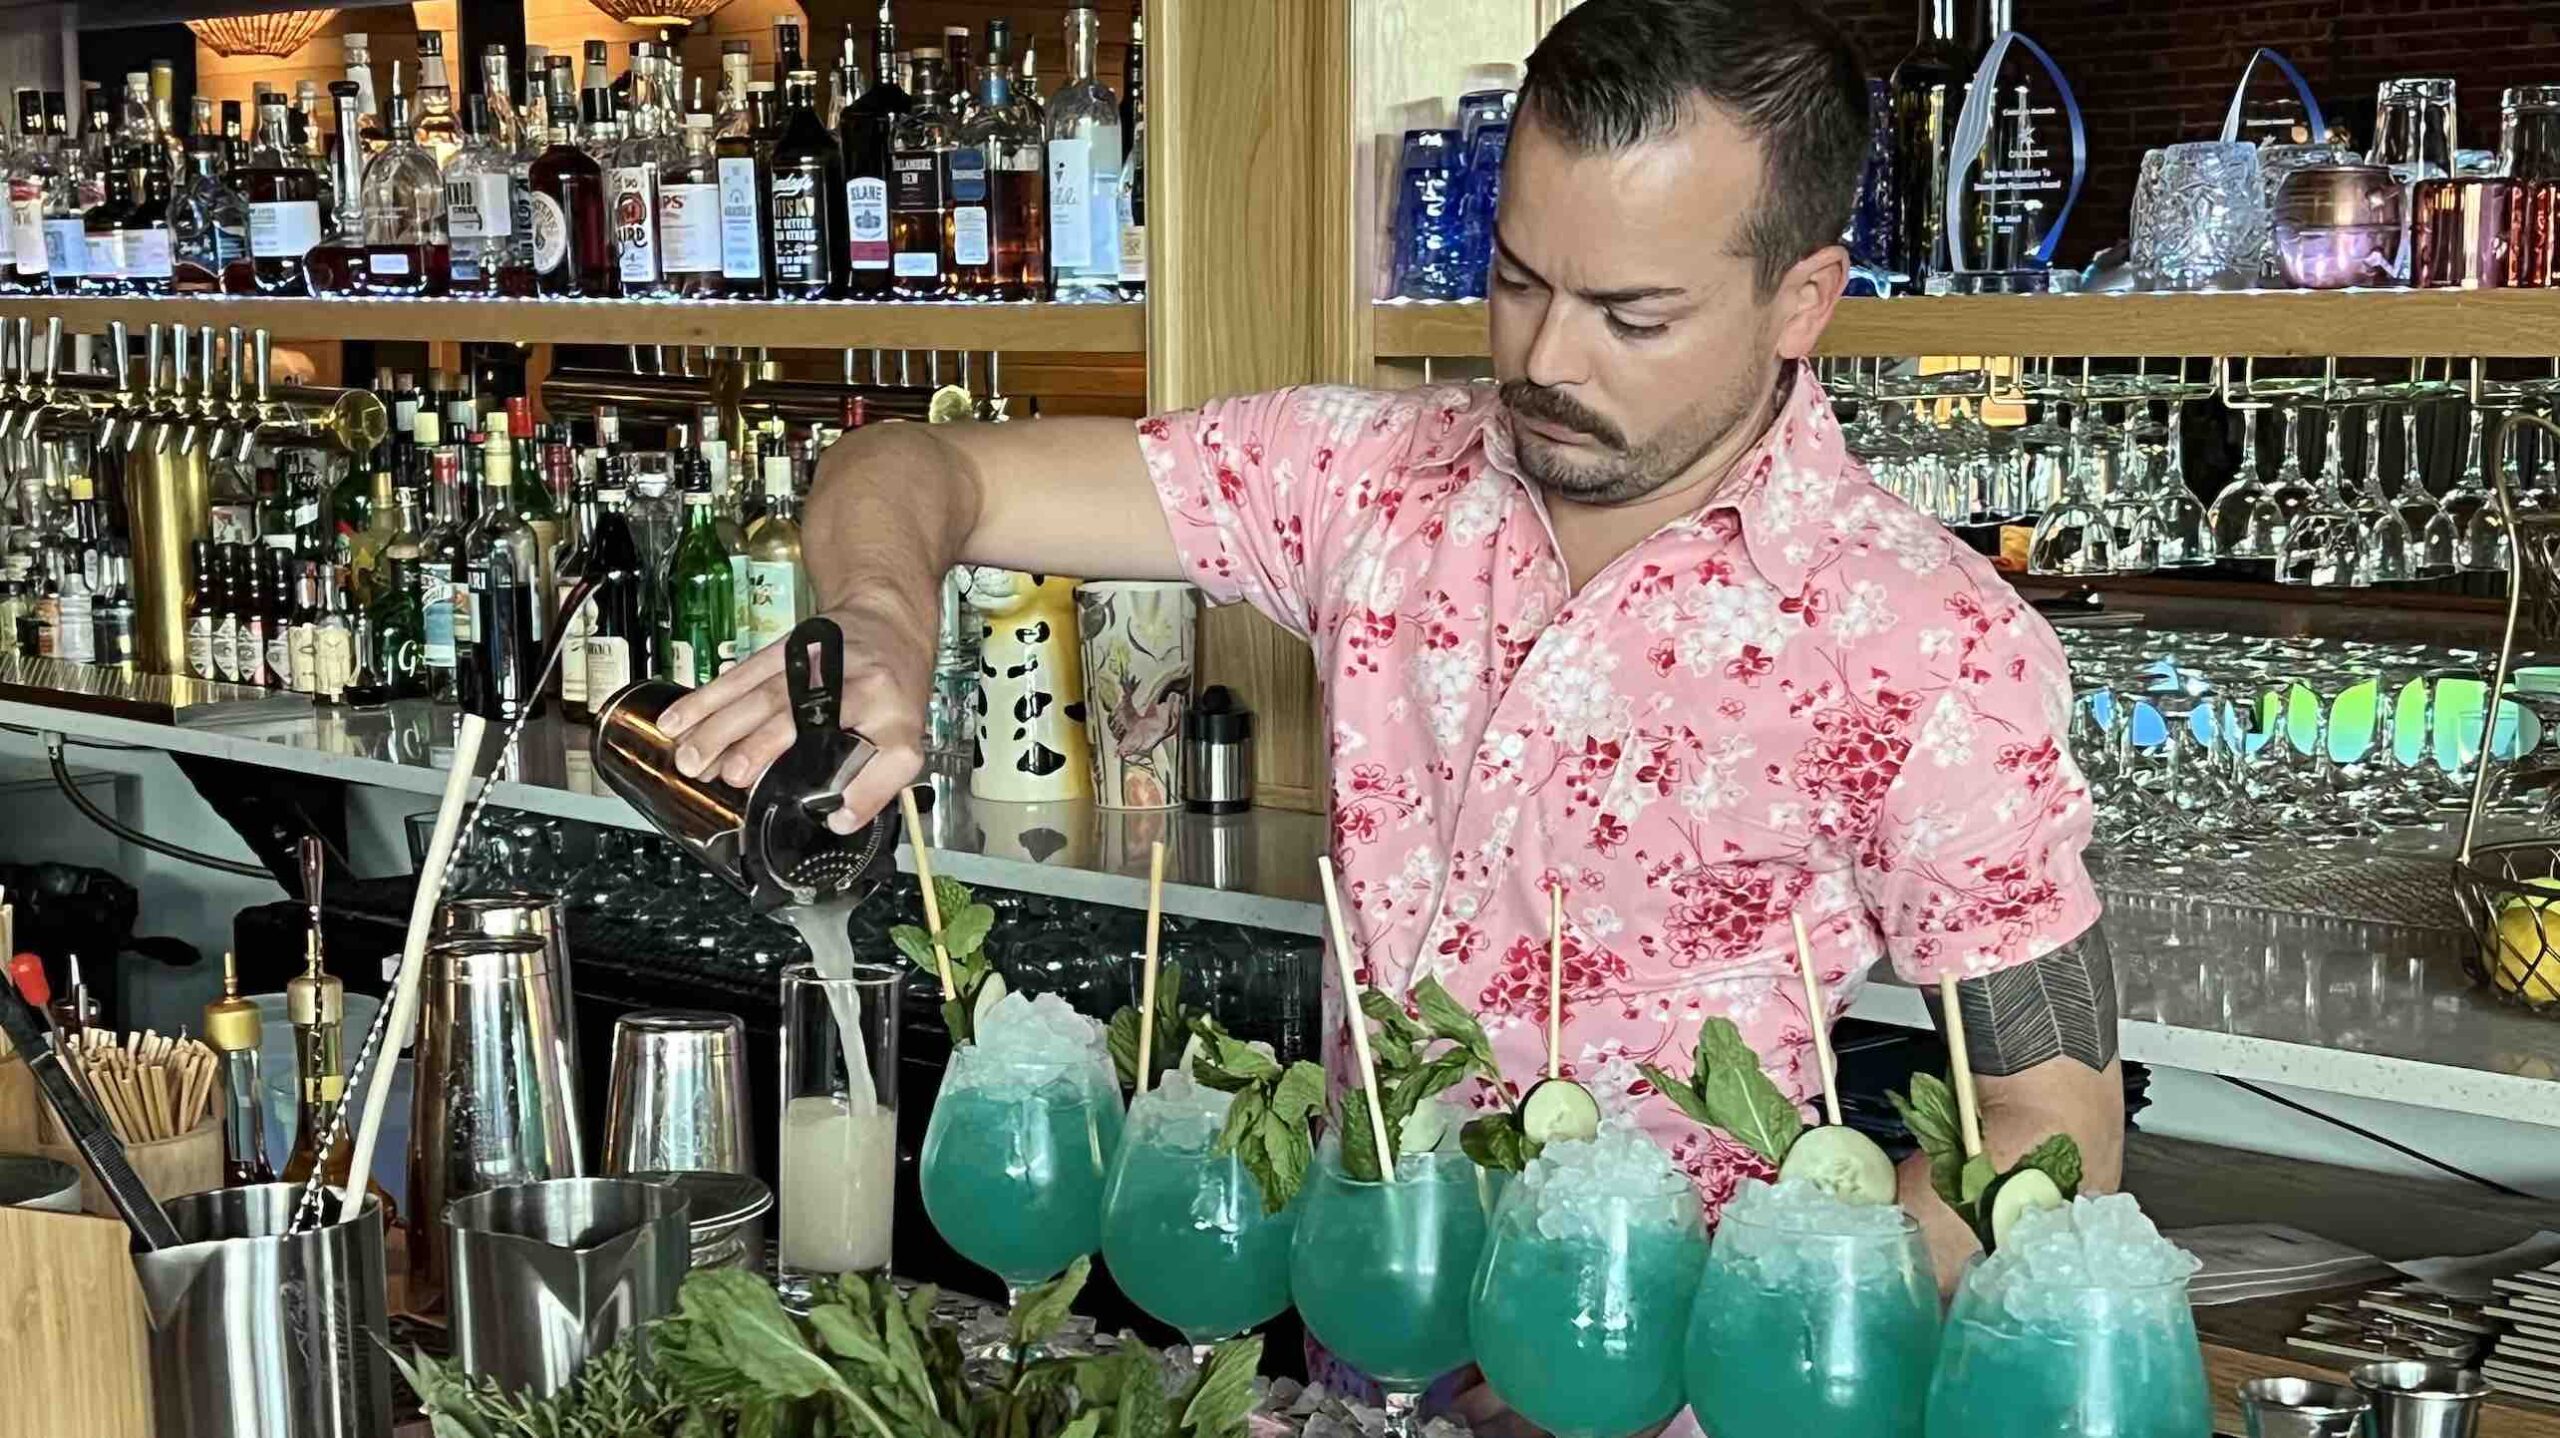 Well Cocktail Bar visit is one of the best fun things to do in Pensacola